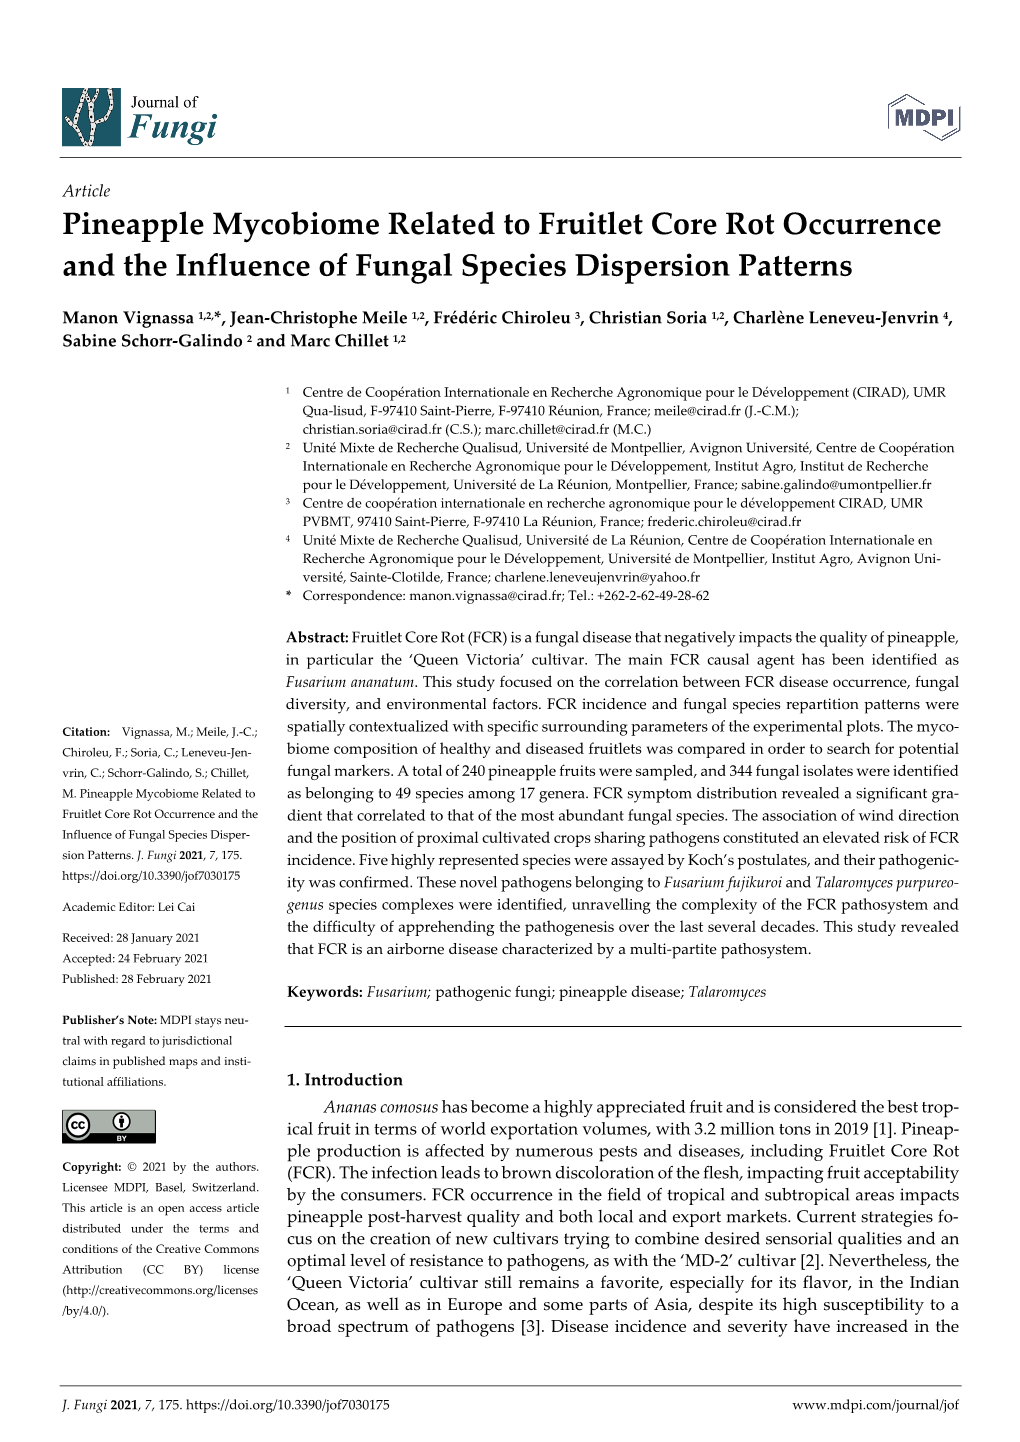 Pineapple Mycobiome Related to Fruitlet Core Rot Occurrence and the Influence of Fungal Species Dispersion Patterns